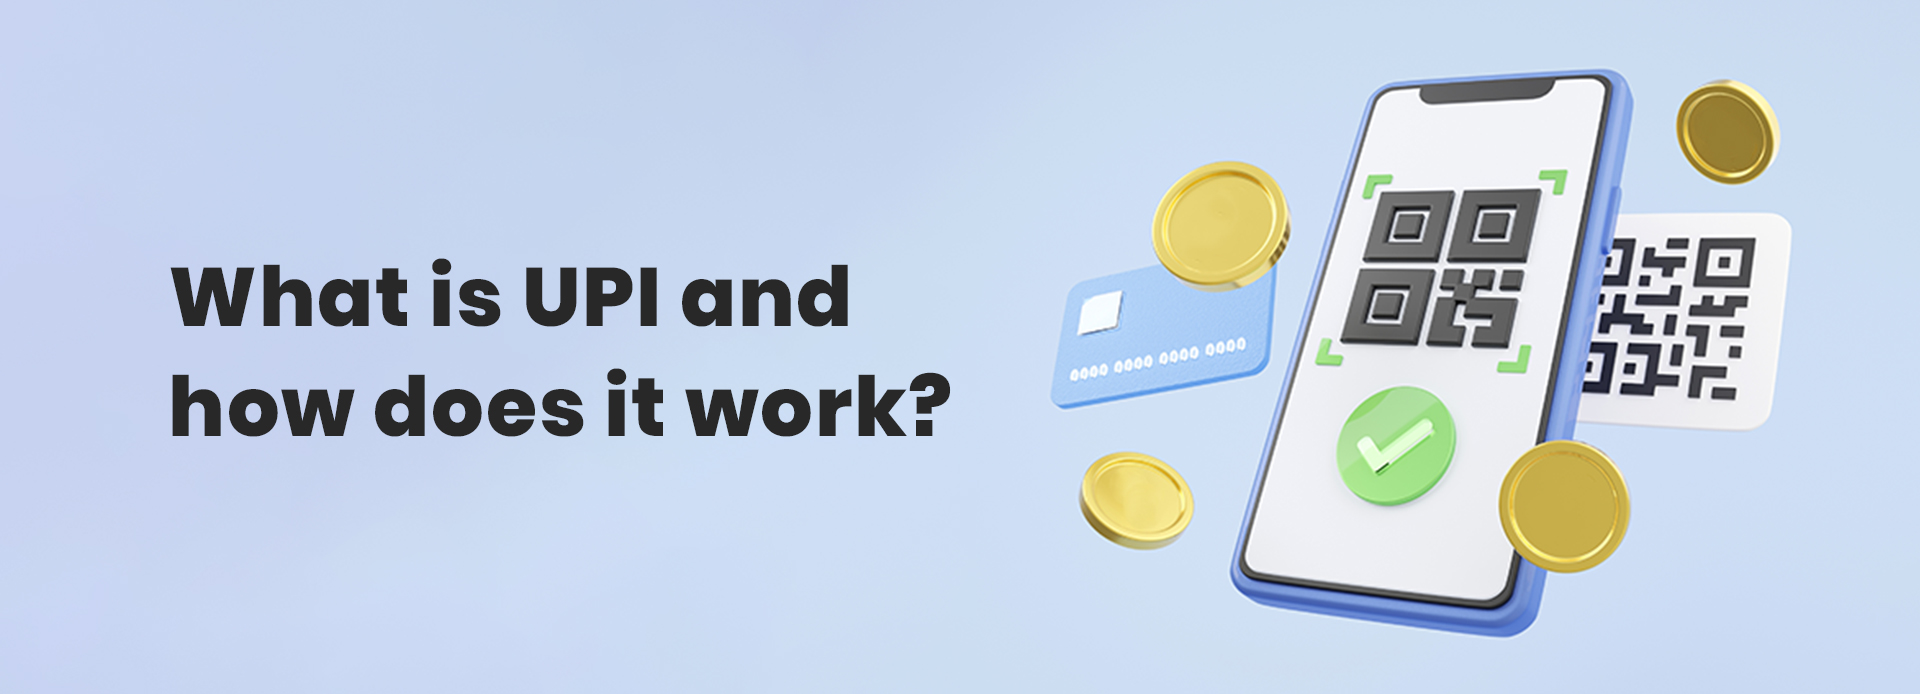 What is a UPI and how does it work?